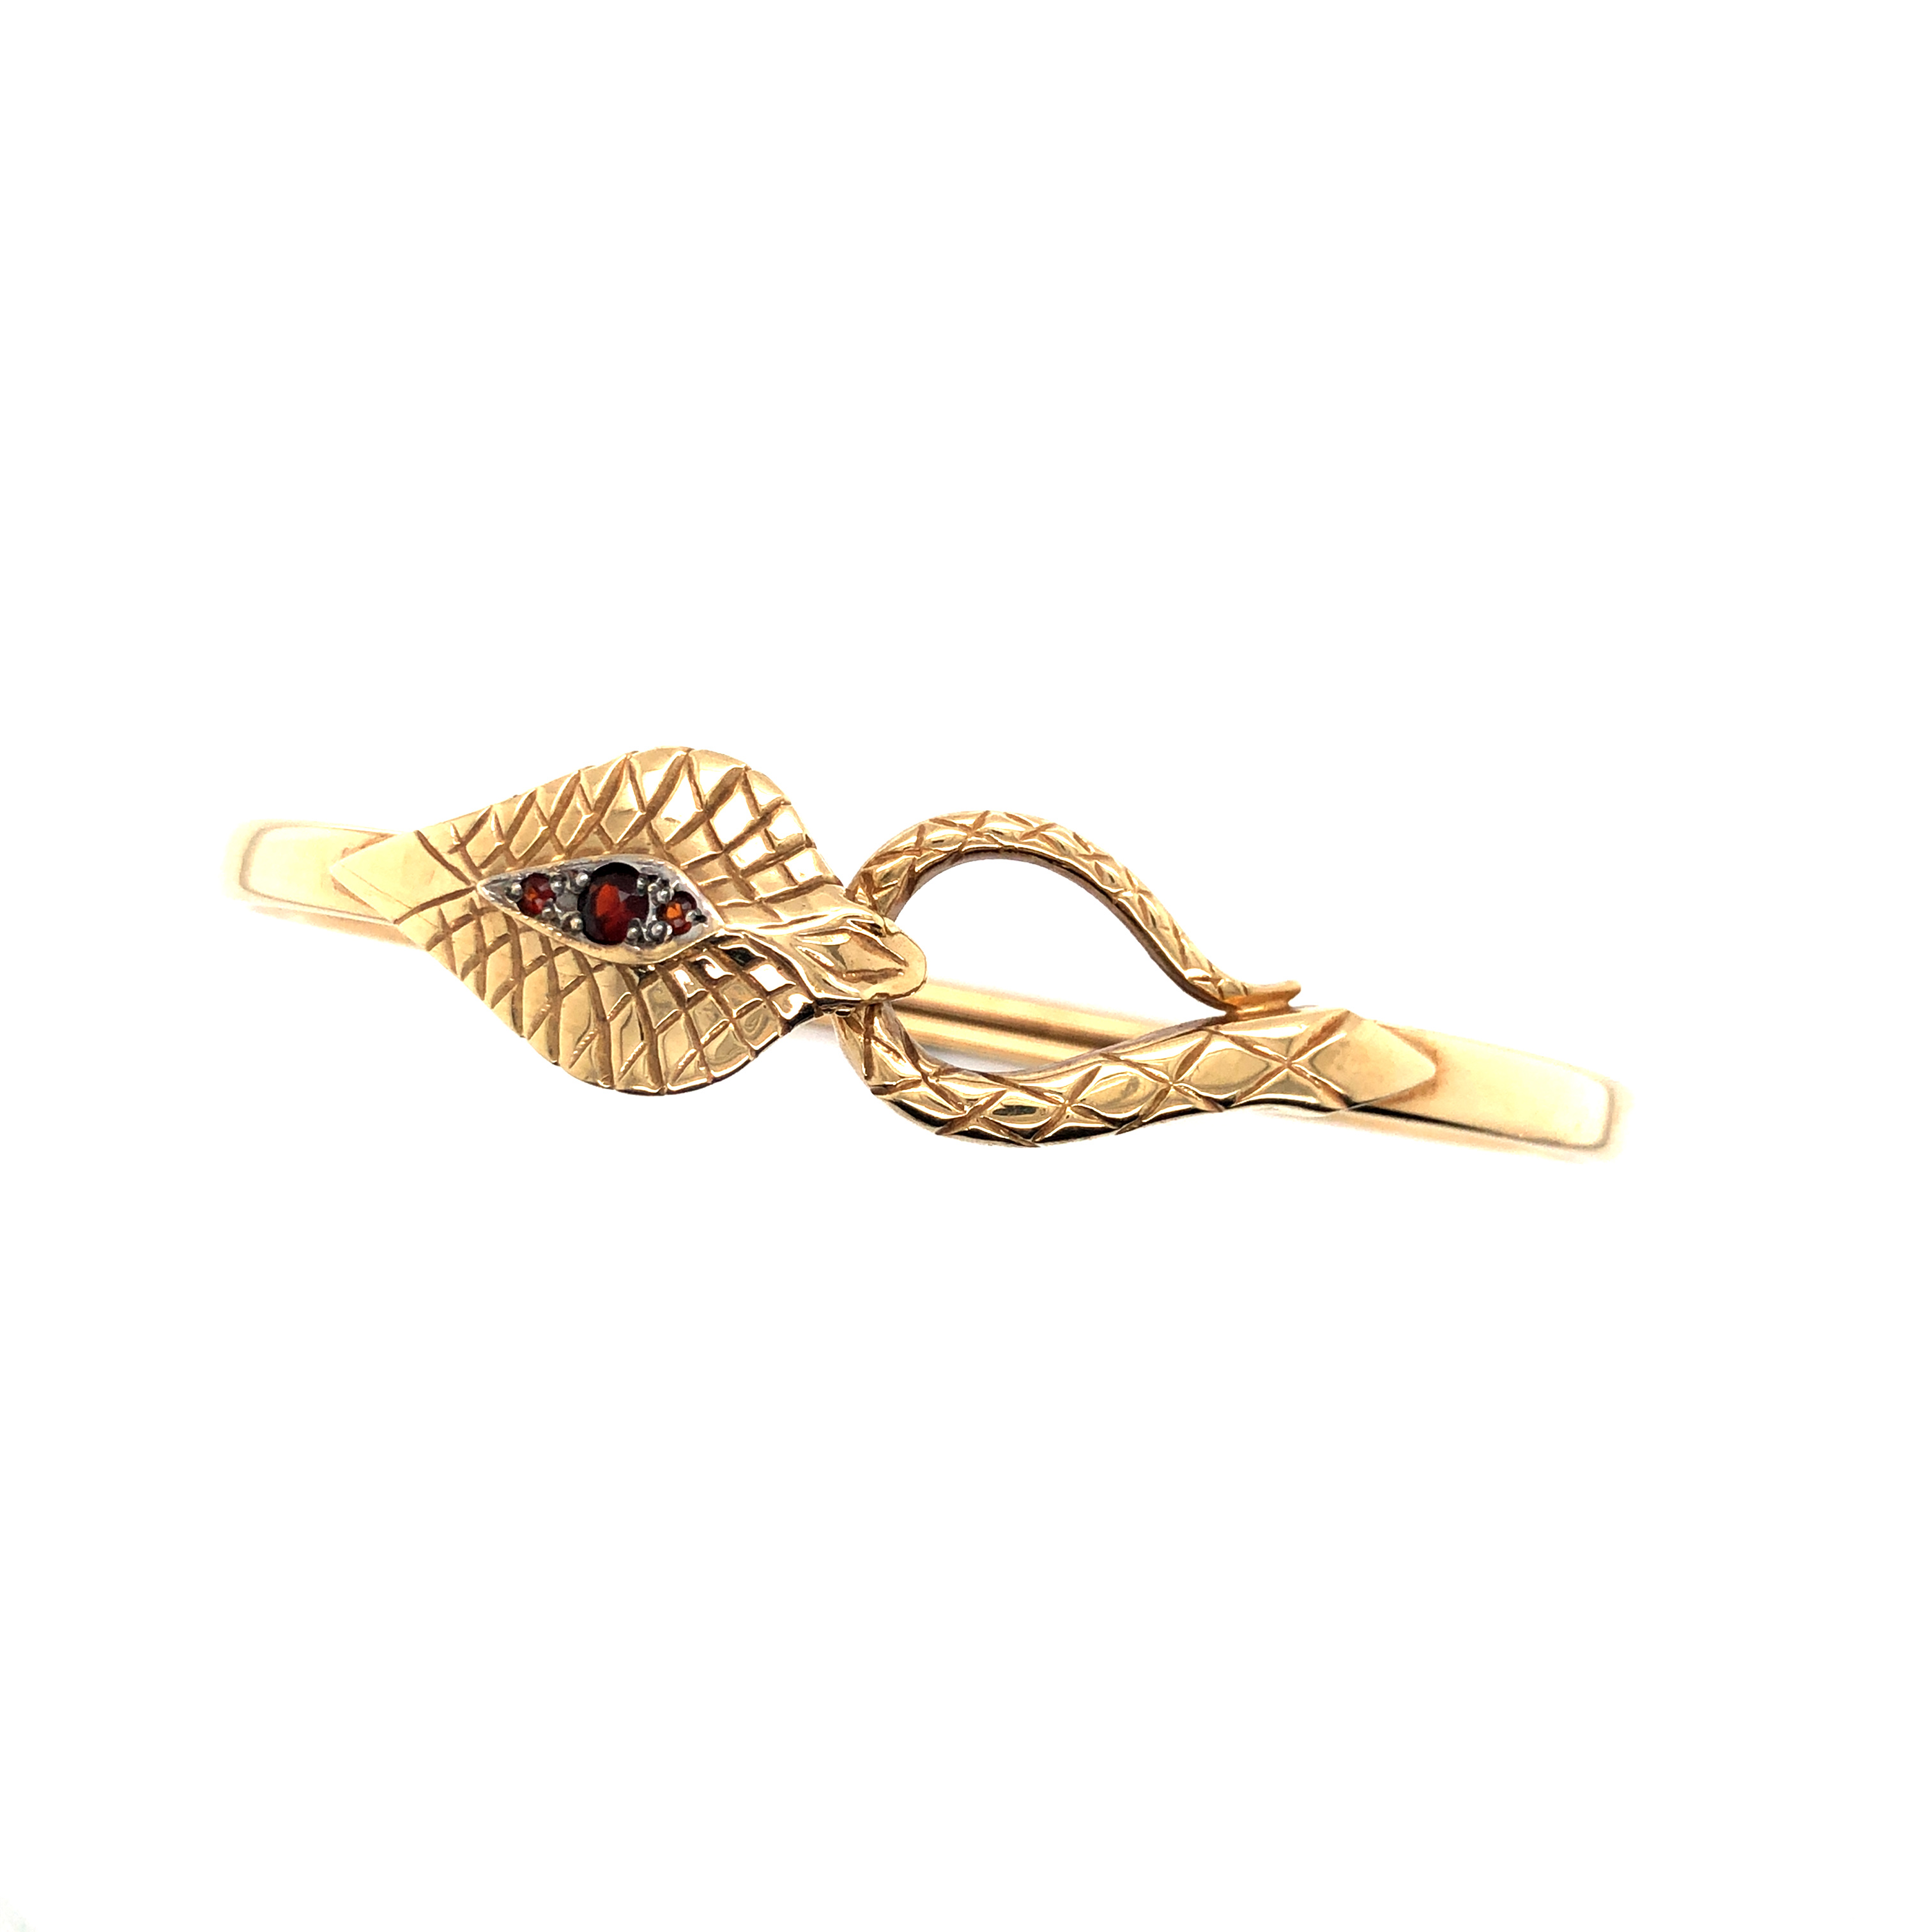 A 9ct HALLMARKED GOLD AND GARNET SET COBRA SNAKE FORM BANGLE. WEIGHT 9.86grms. - Image 4 of 4